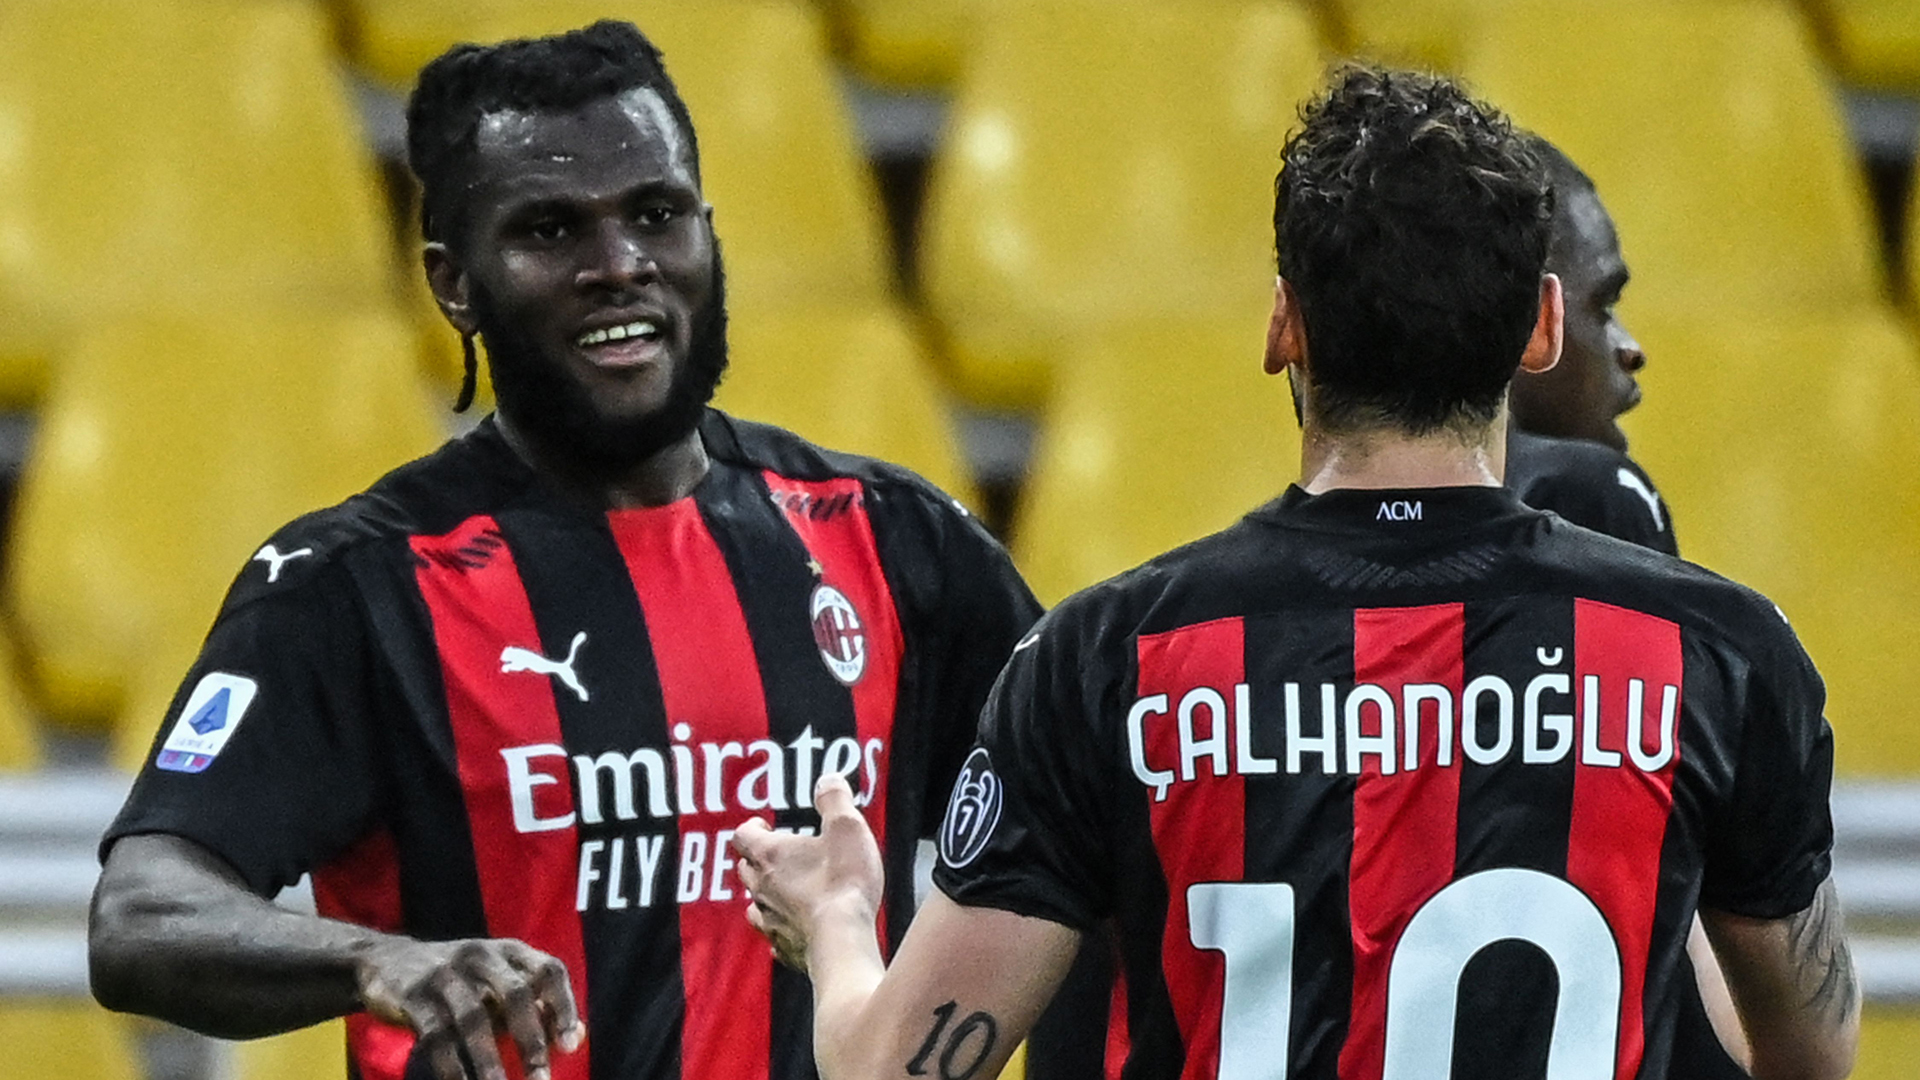 Fan View: AC Milan's Kessie would be good signing for Liverpool